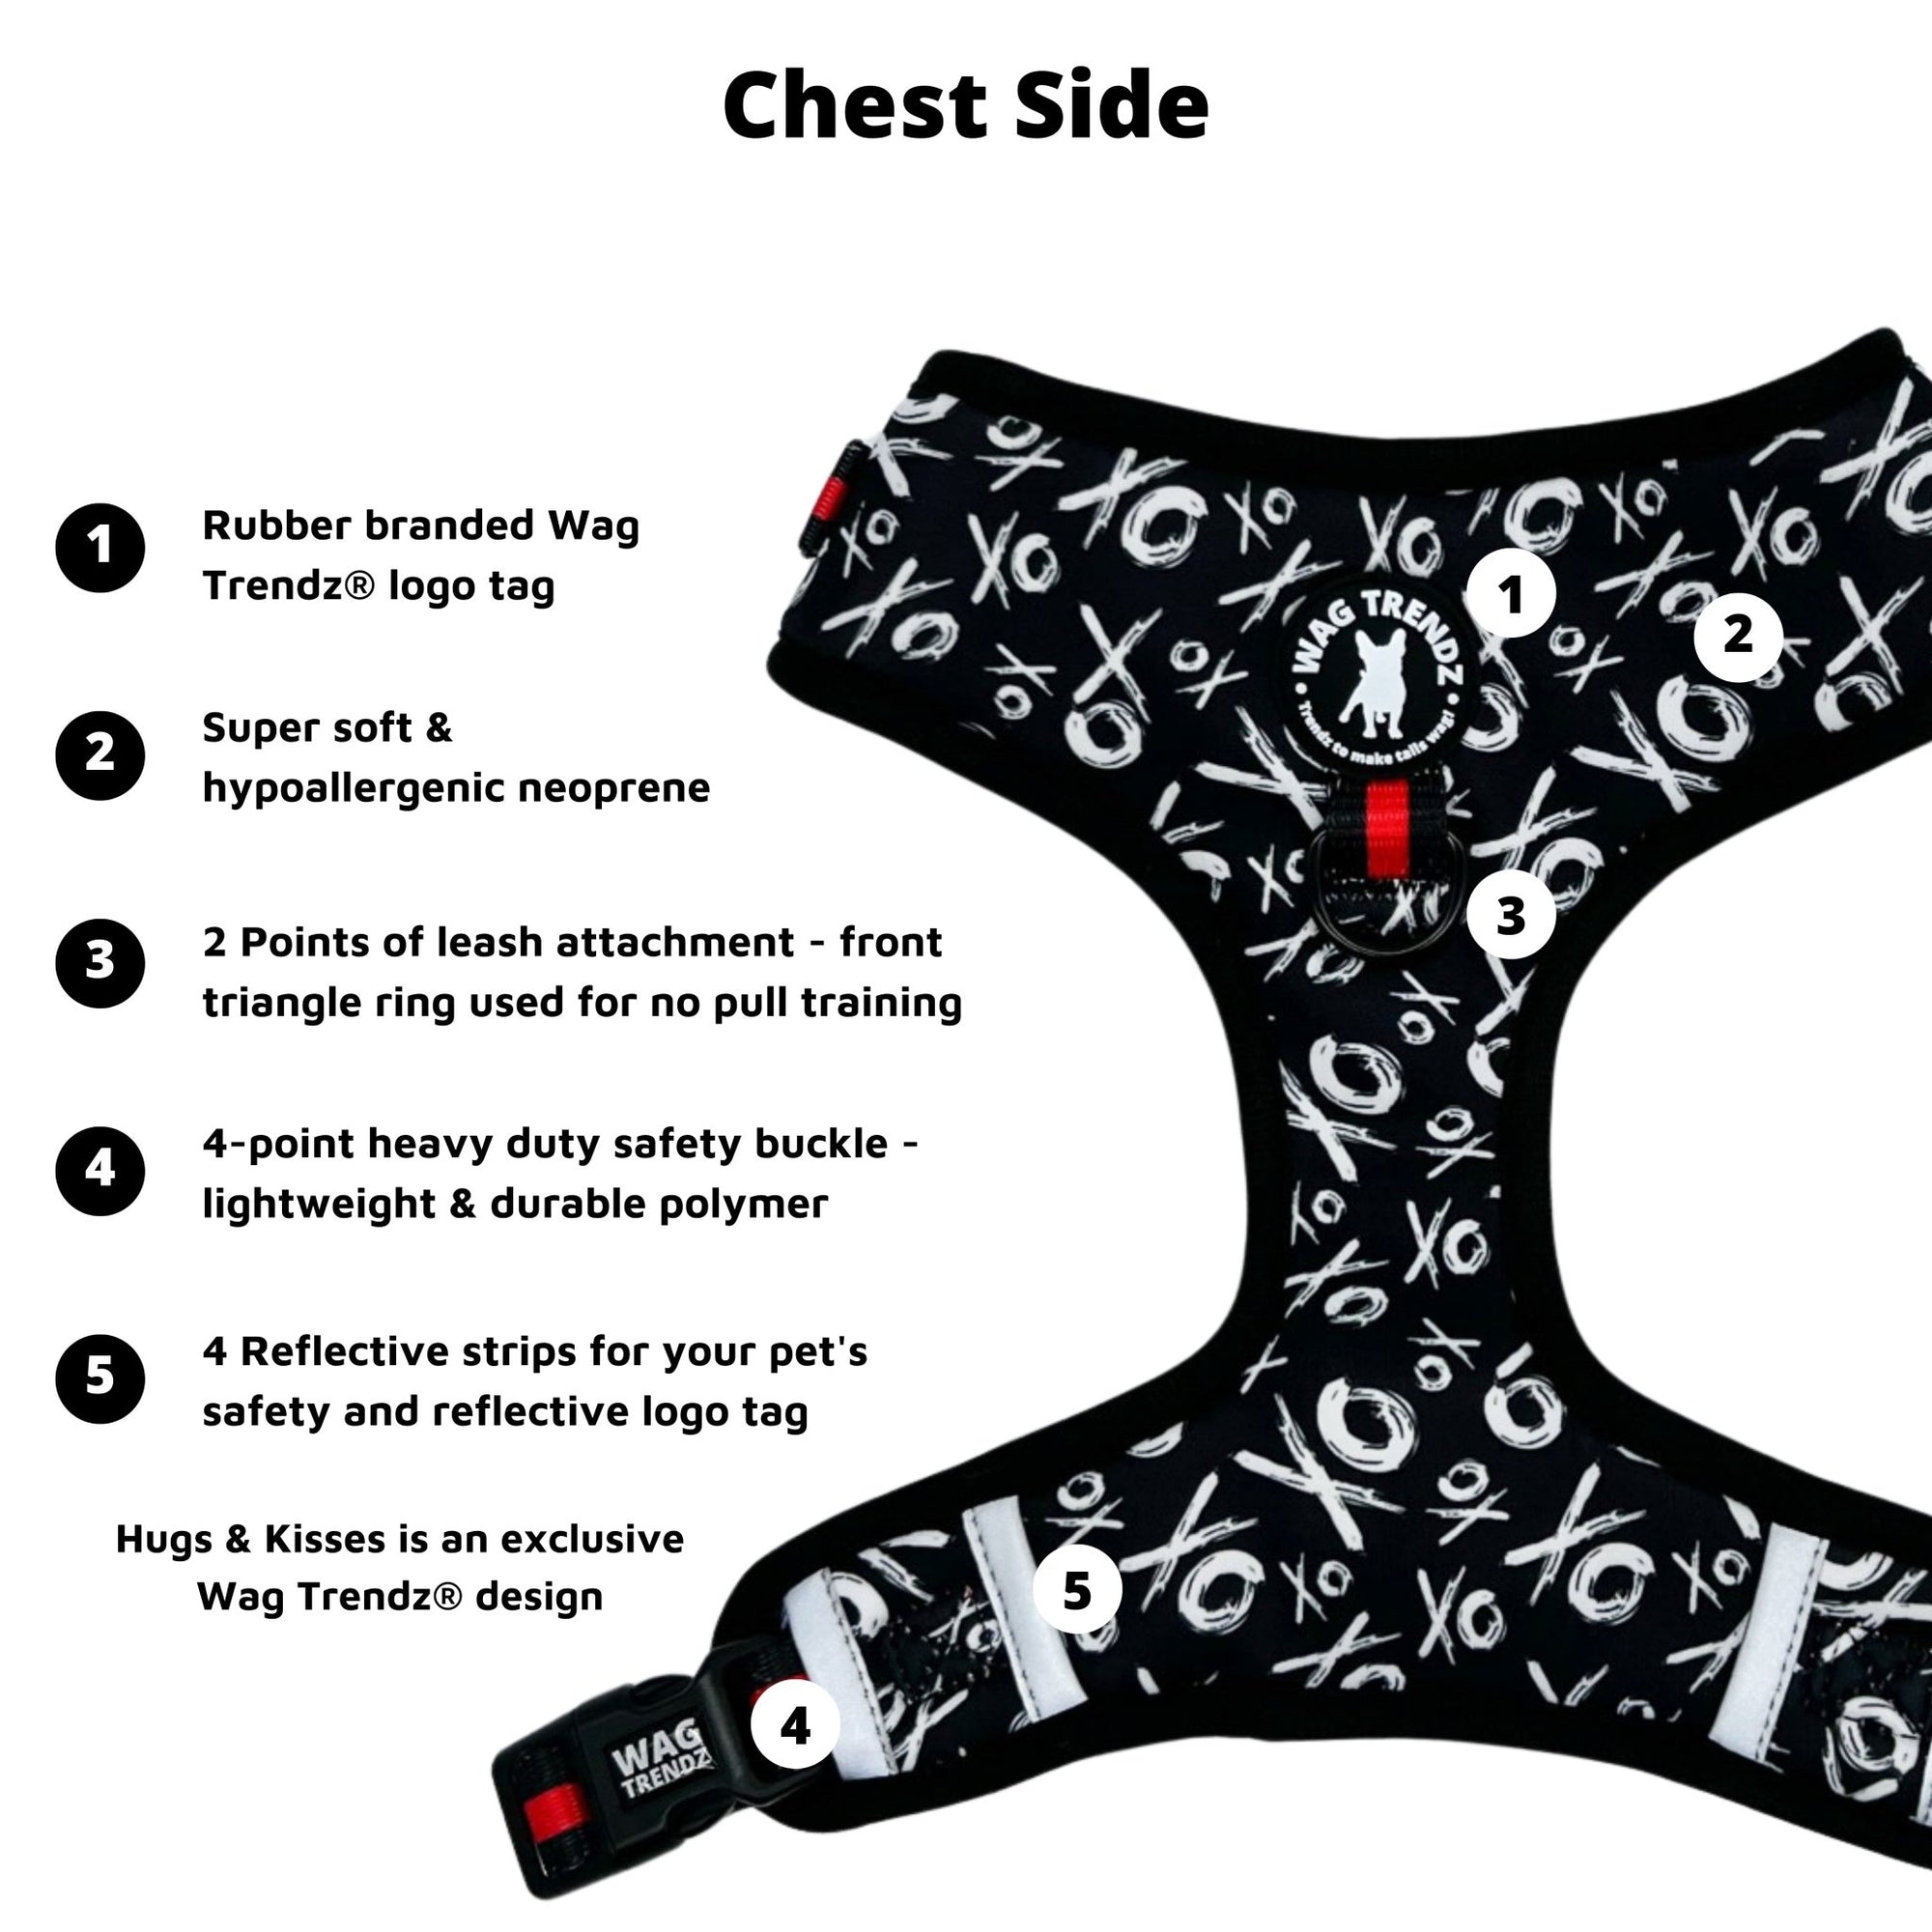 Dog Leash and Harness Set- Dog Harness Vest in black and white XO&#39;s with bold red accents - product feature captions - chest side - against solid white background - Wag Trendz